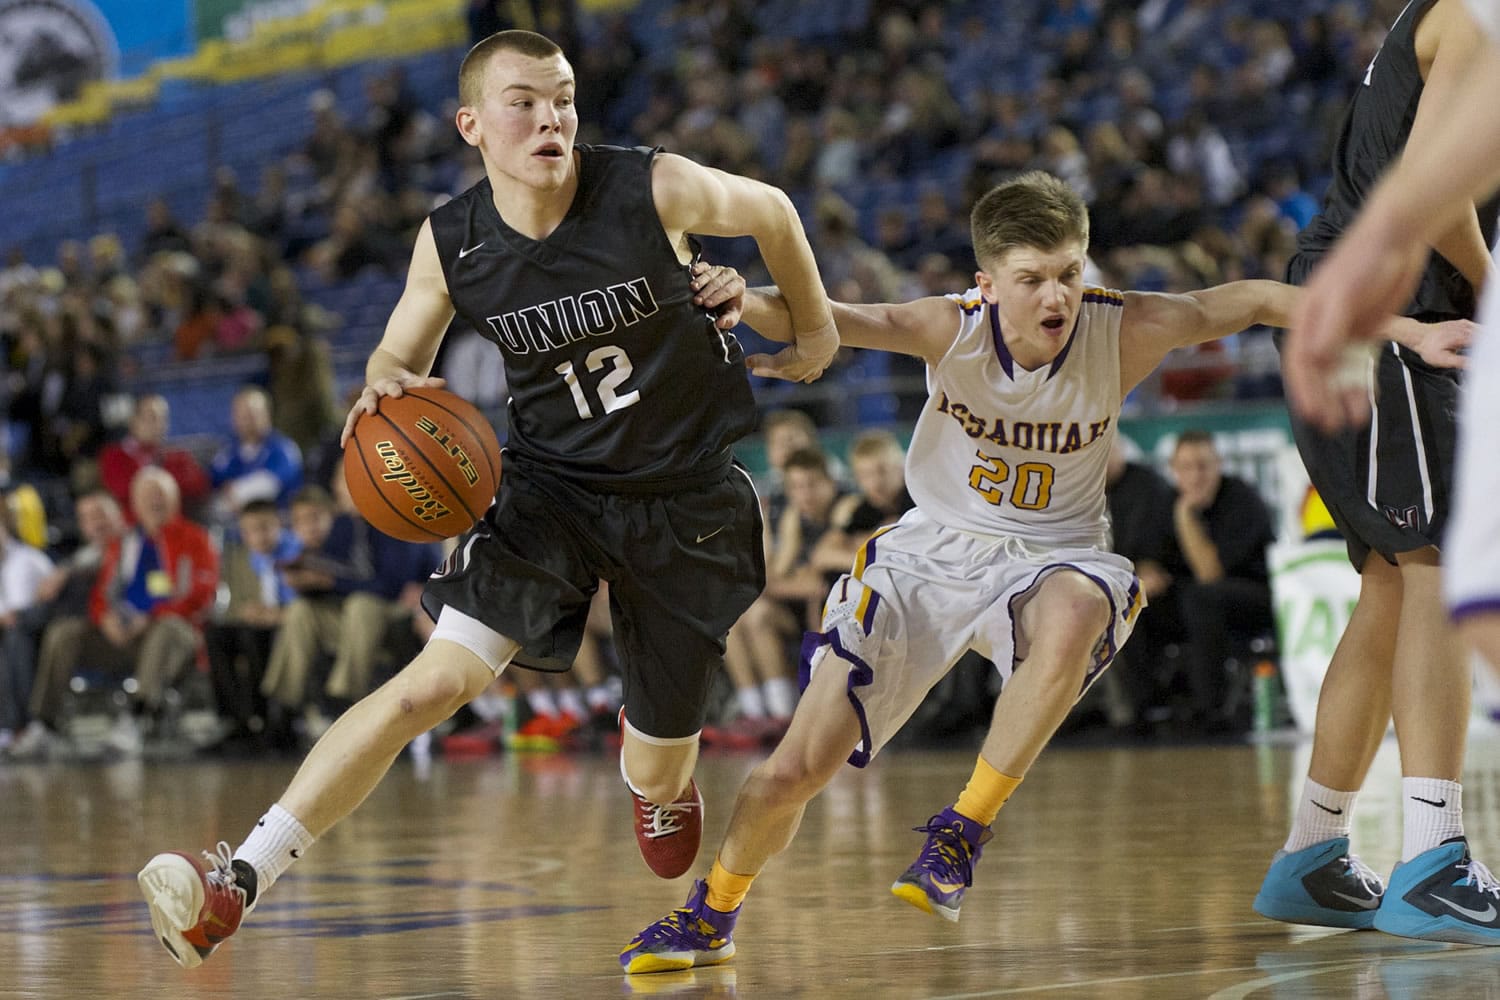 Micah Paulson makes a move to the basket as Union beats Issaquah 63-55 at the 2015 WIAA Hardwood Classic 4A Boys tournament at the Tacoma Dome, Thursday, March 5, 2015.